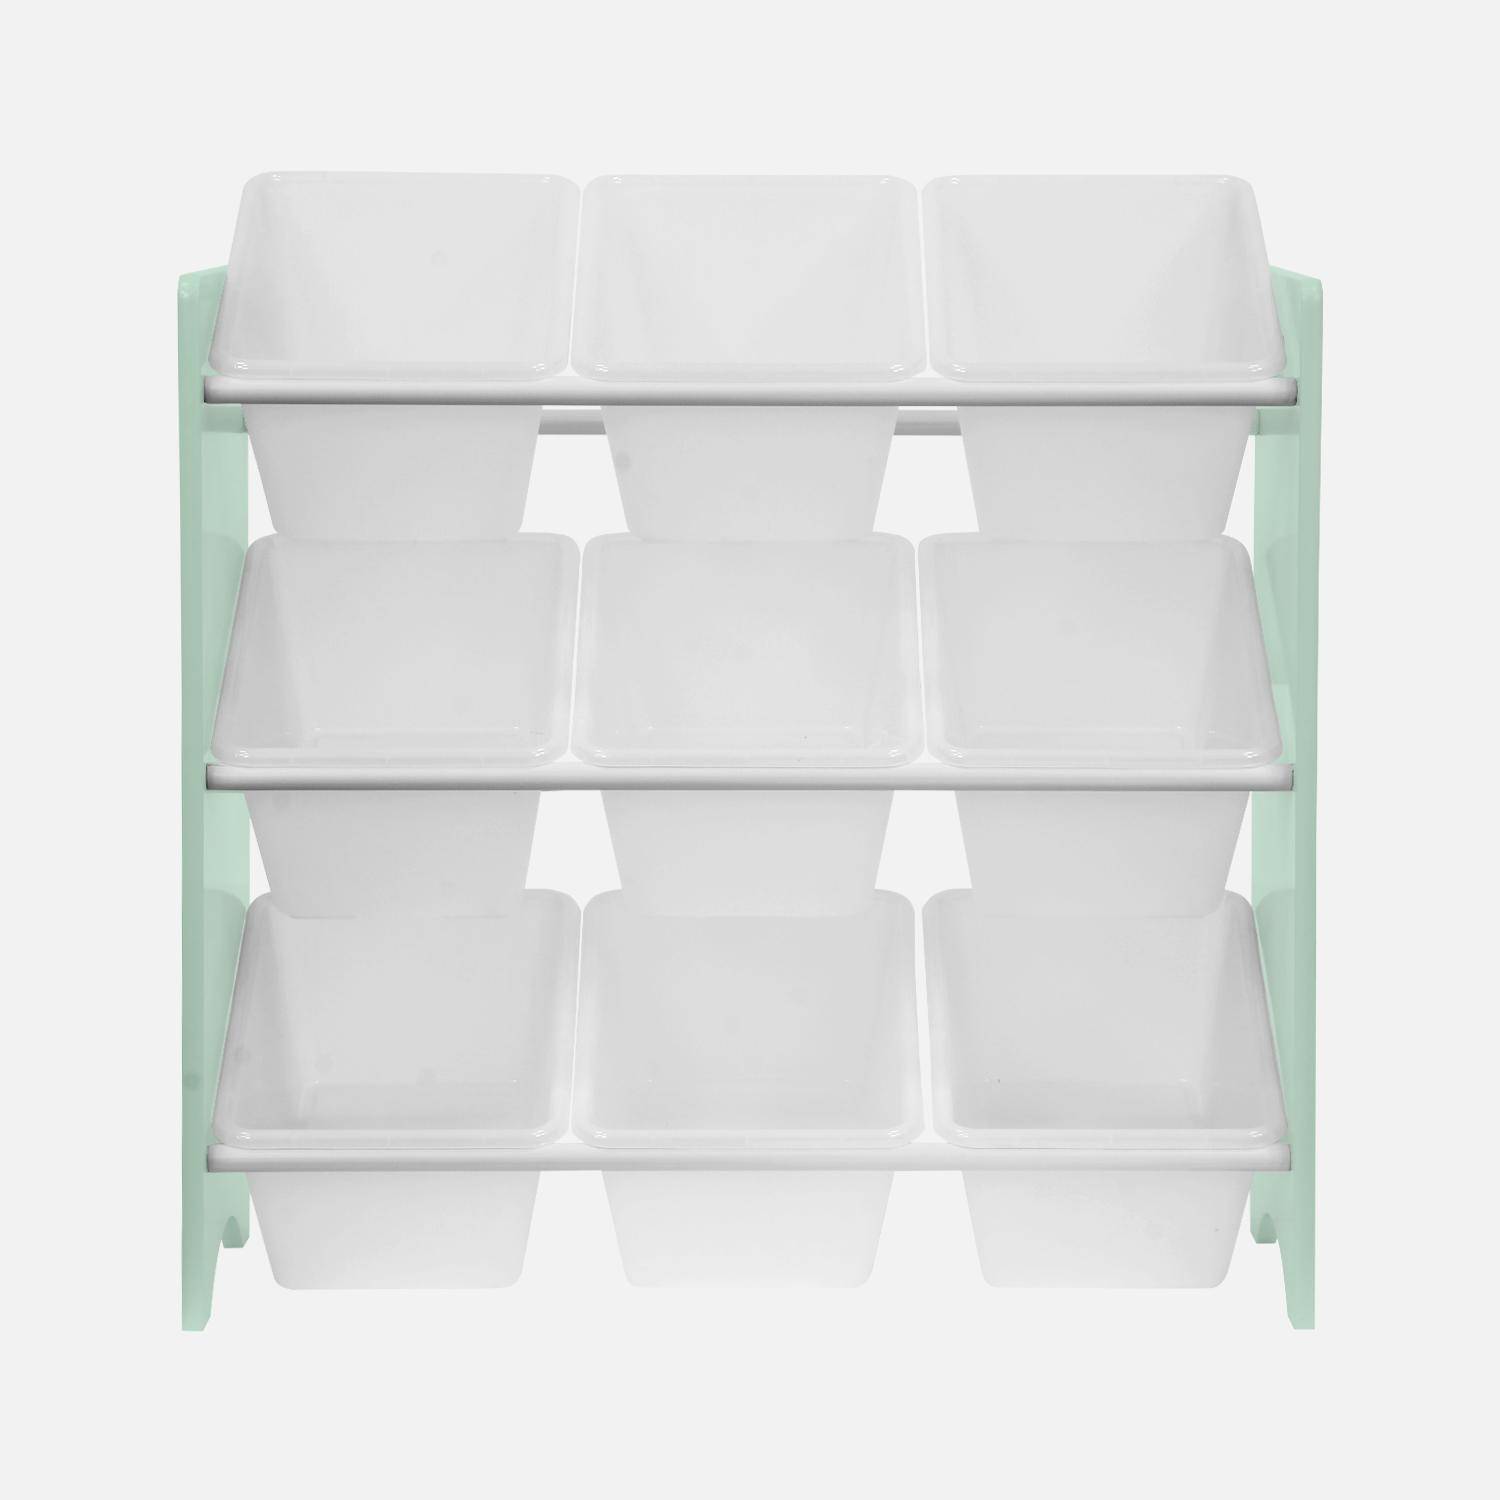 Storage unit for children with 9 compartments, celadon green - Tobias - MDF natural wood decor, 64x29.5x60cm,sweeek,Photo4